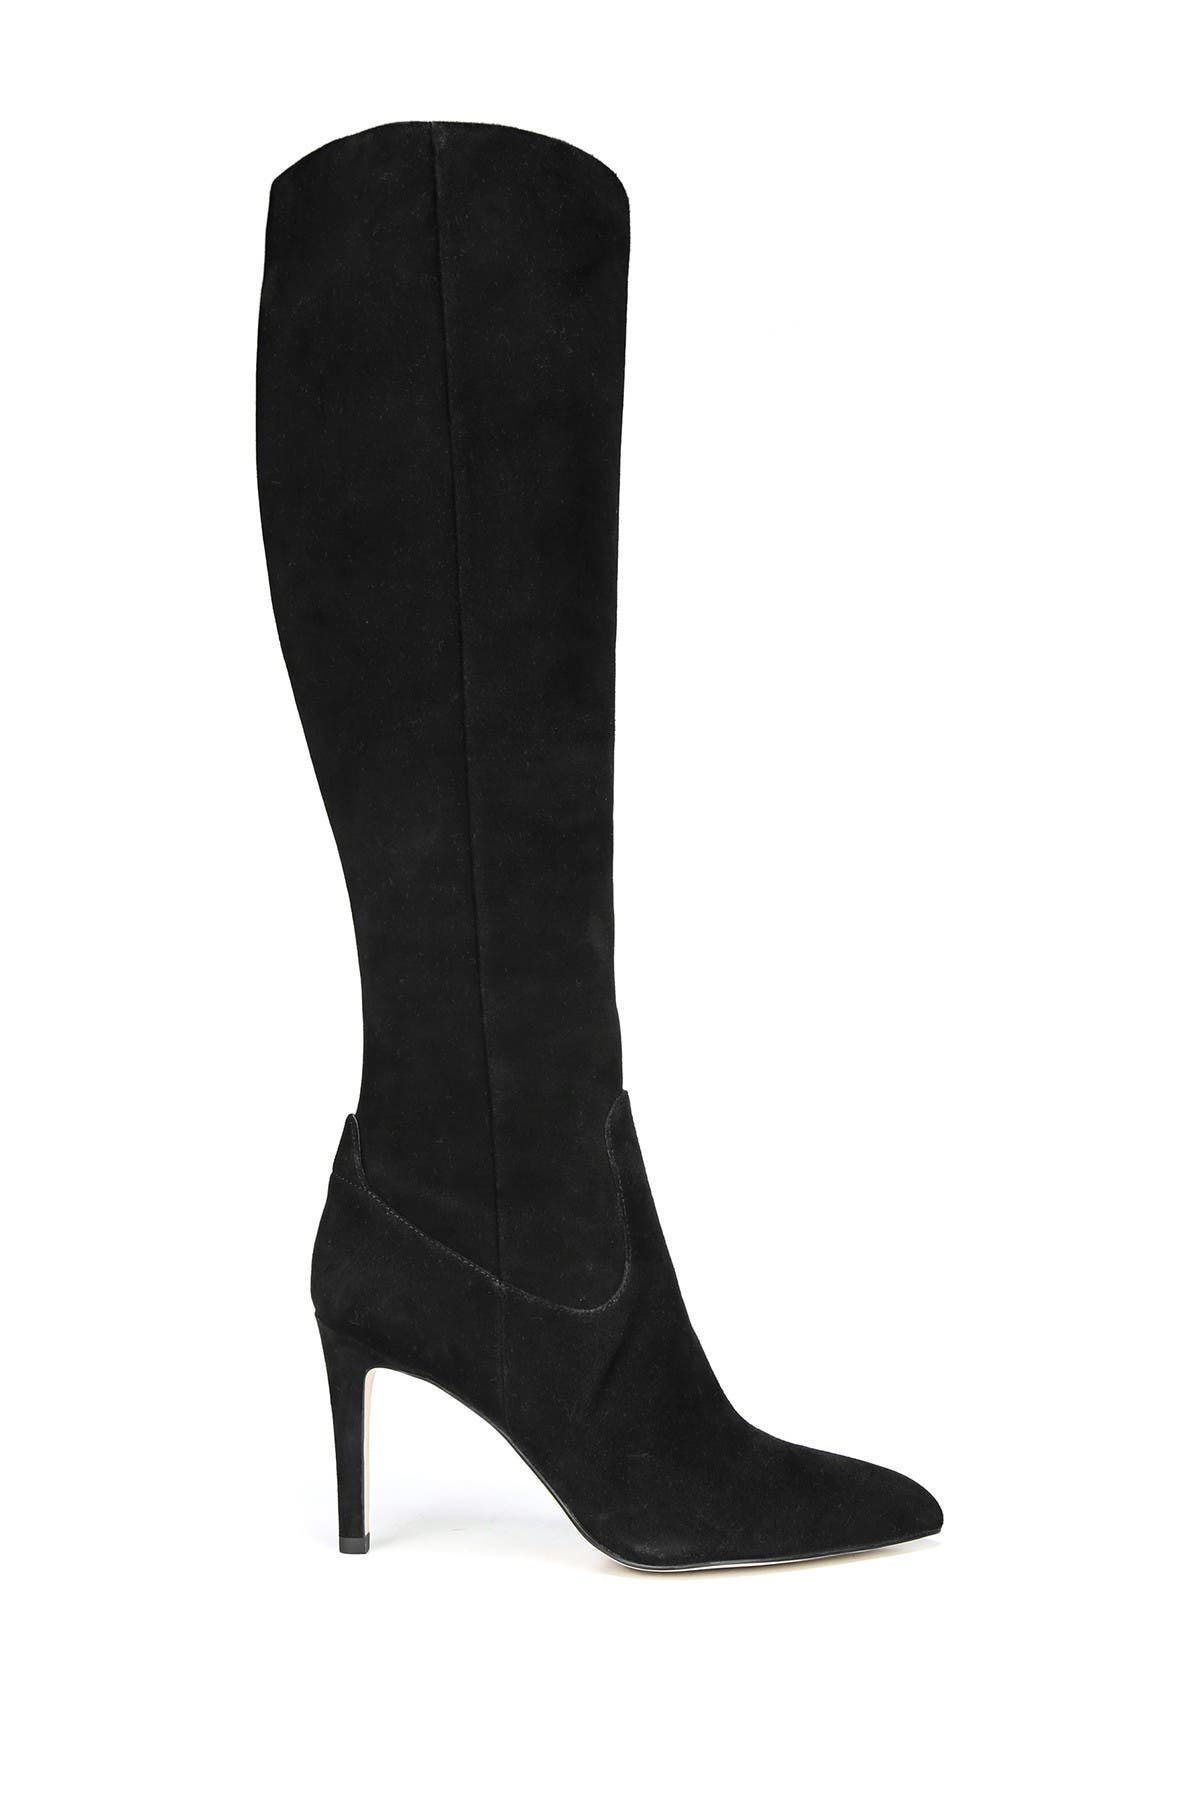 Olencia Suede Leather Knee High Boot 